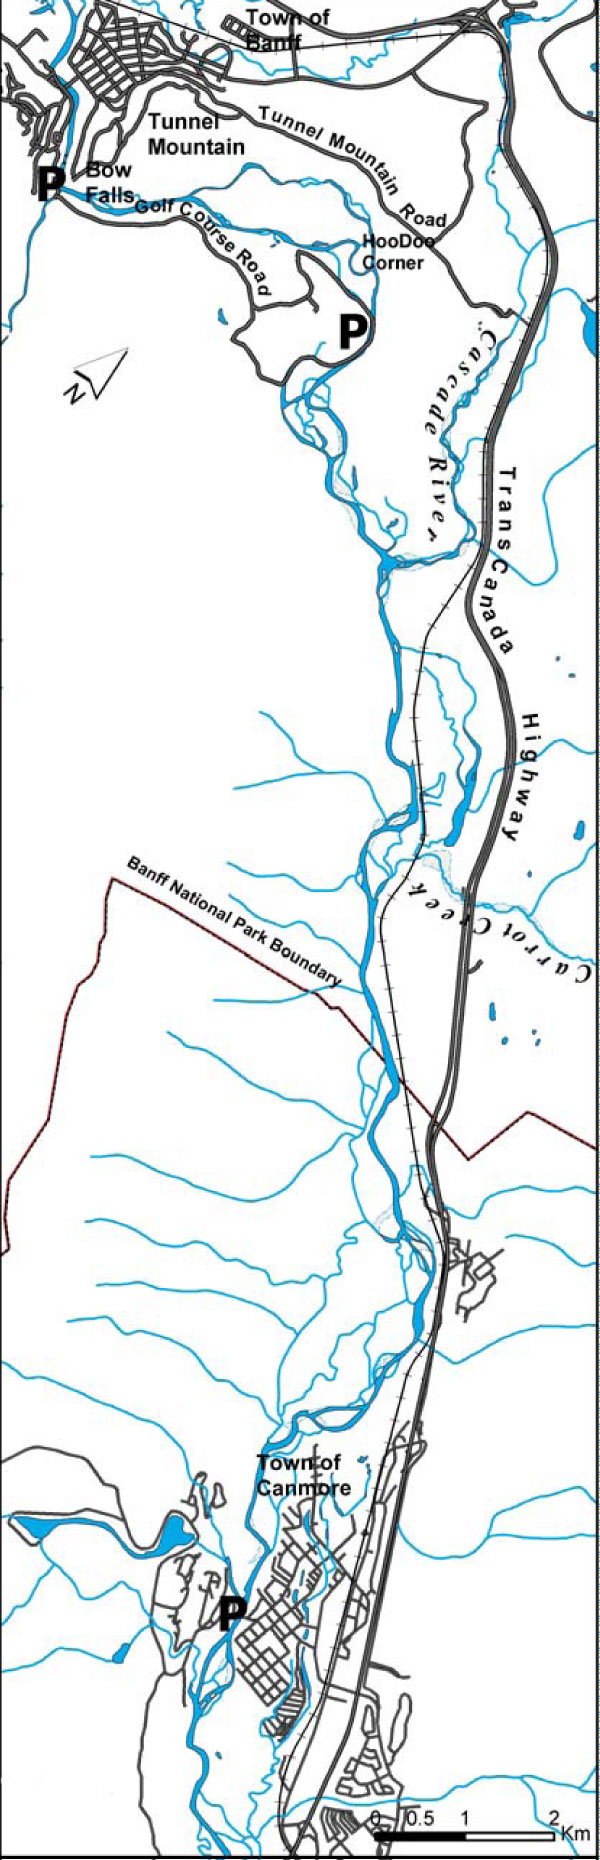 Map of Section # 3 Bow Falls to Canmore